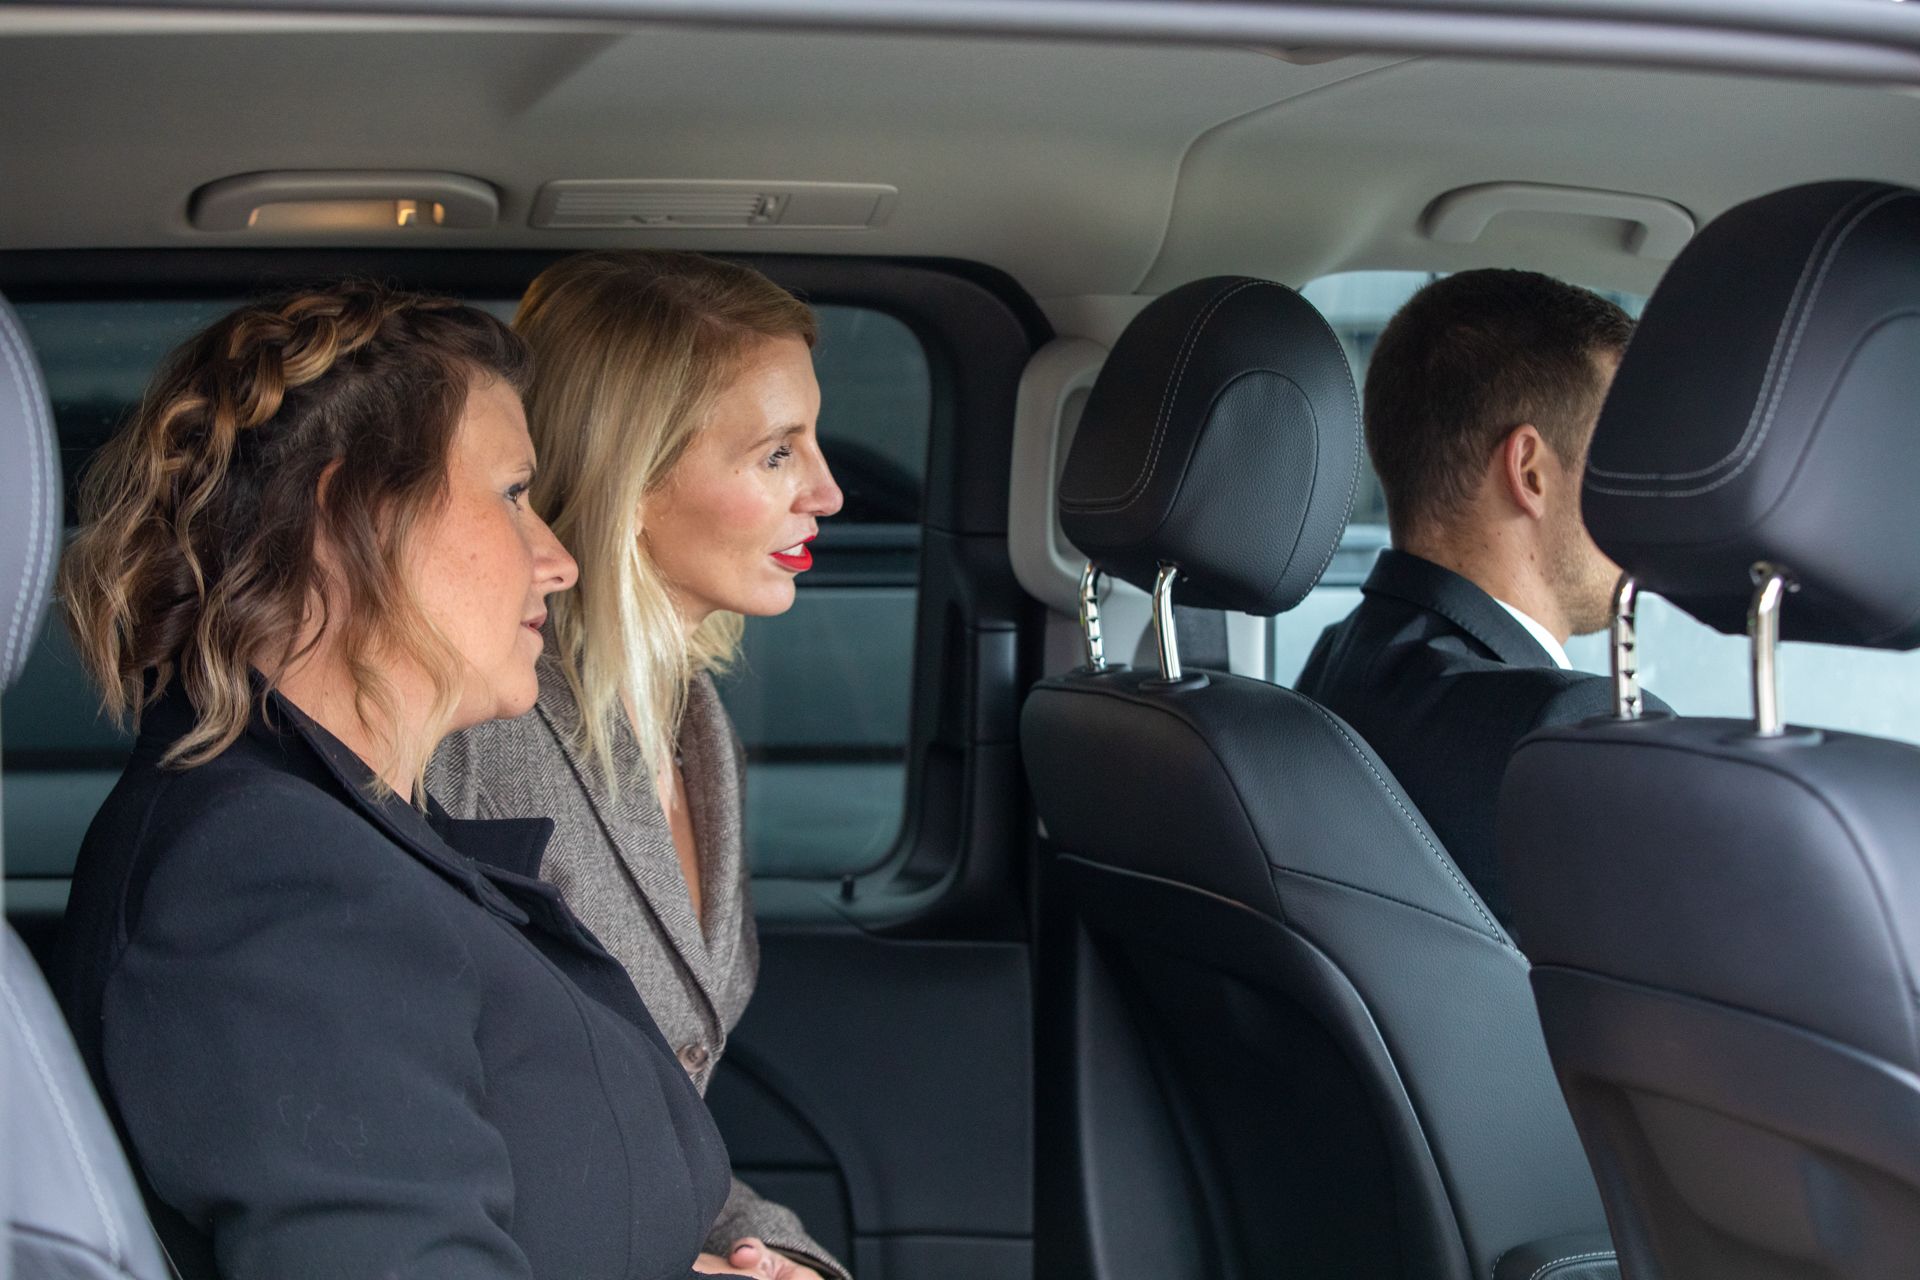 Travel in style with our chauffeur service